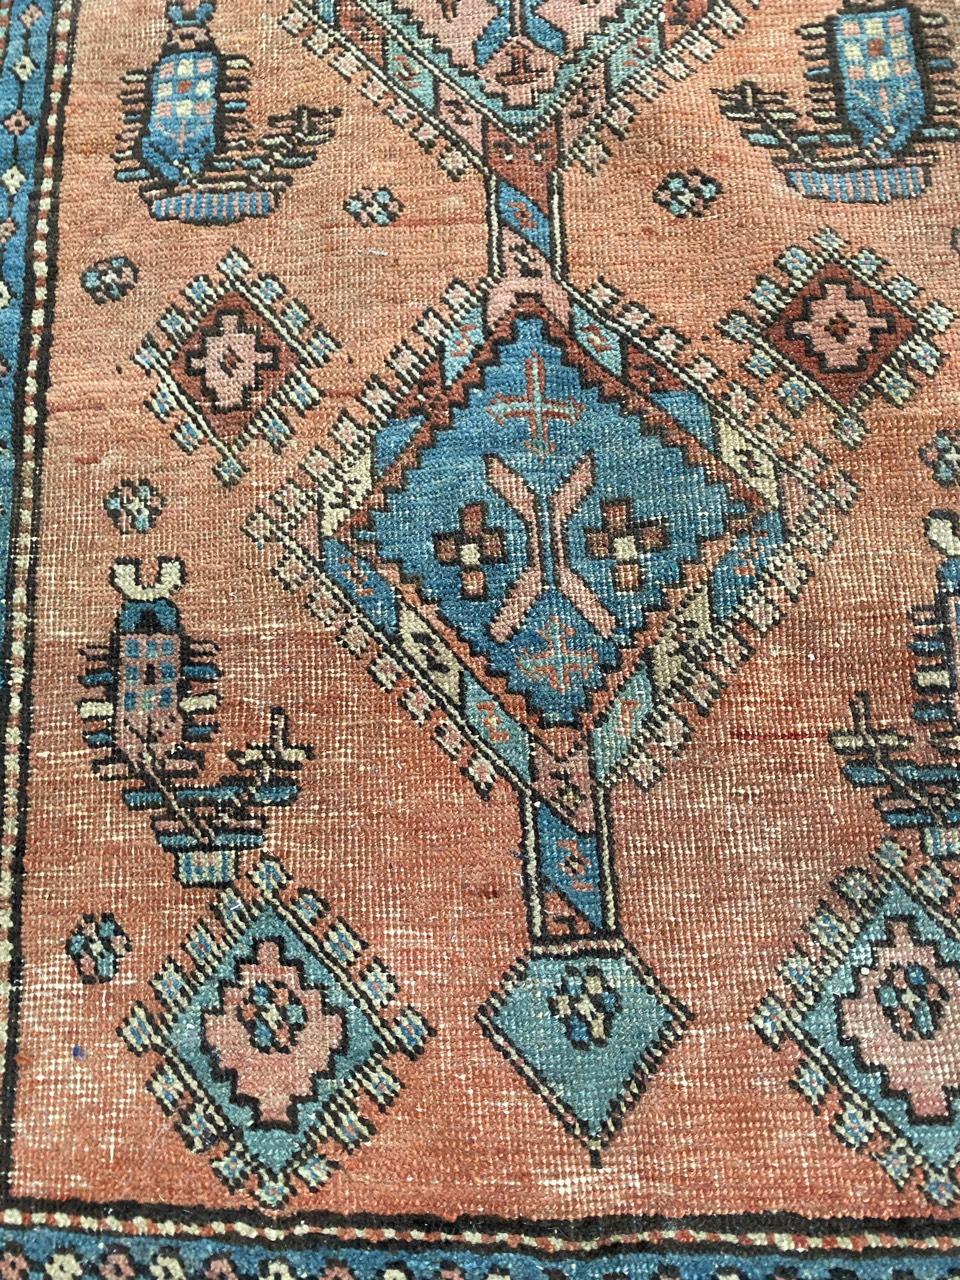 Very beautiful late 19th century rug with nice tribal design and beautiful natural colors with orange, blue, pink and green, entirely hand knotted with wool velvet on cotton foundation.